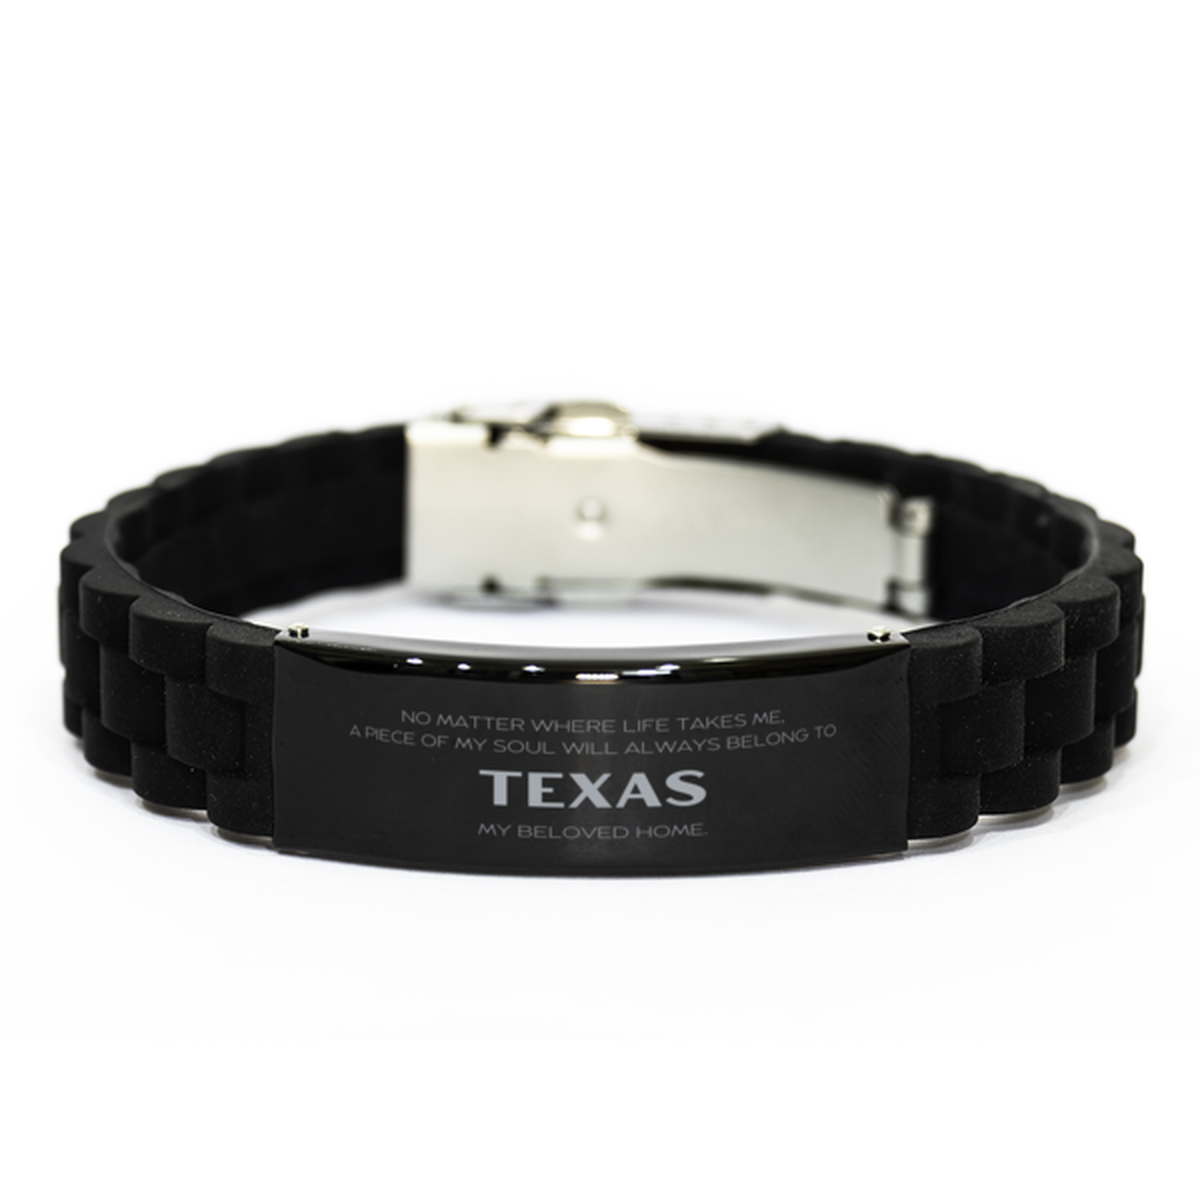 Love Texas State Gifts, My soul will always belong to Texas, Proud Black Glidelock Clasp Bracelet, Birthday Unique Gifts For Texas Men, Women, Friends